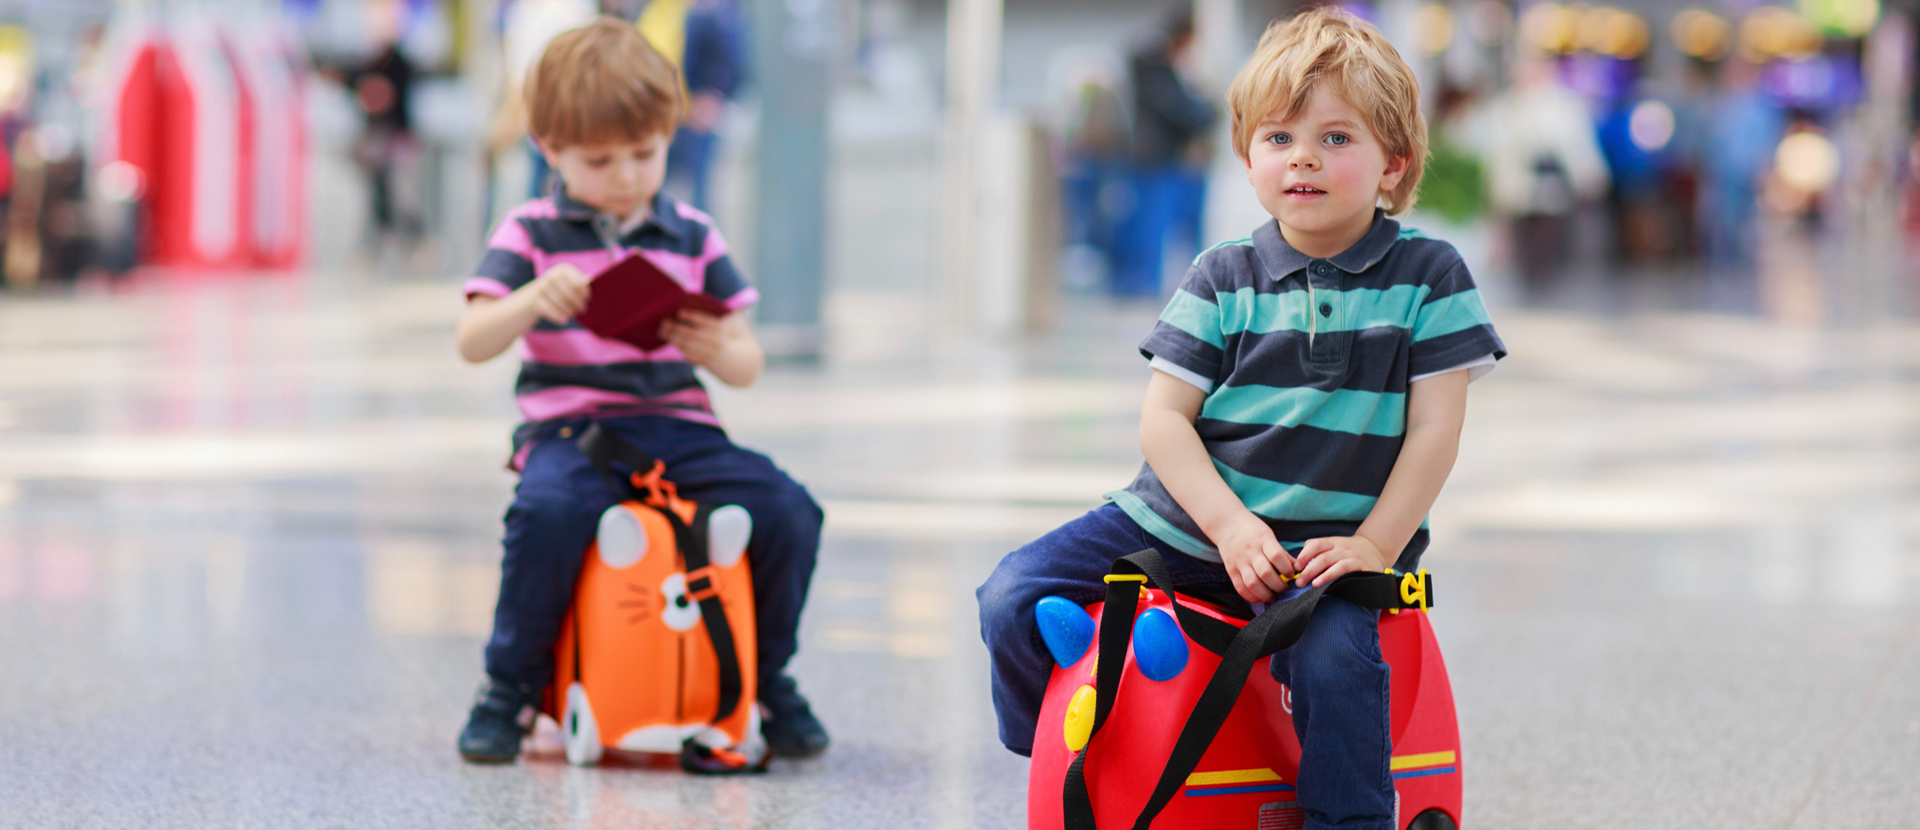 Do I need consent to travel abroad with my minor child?